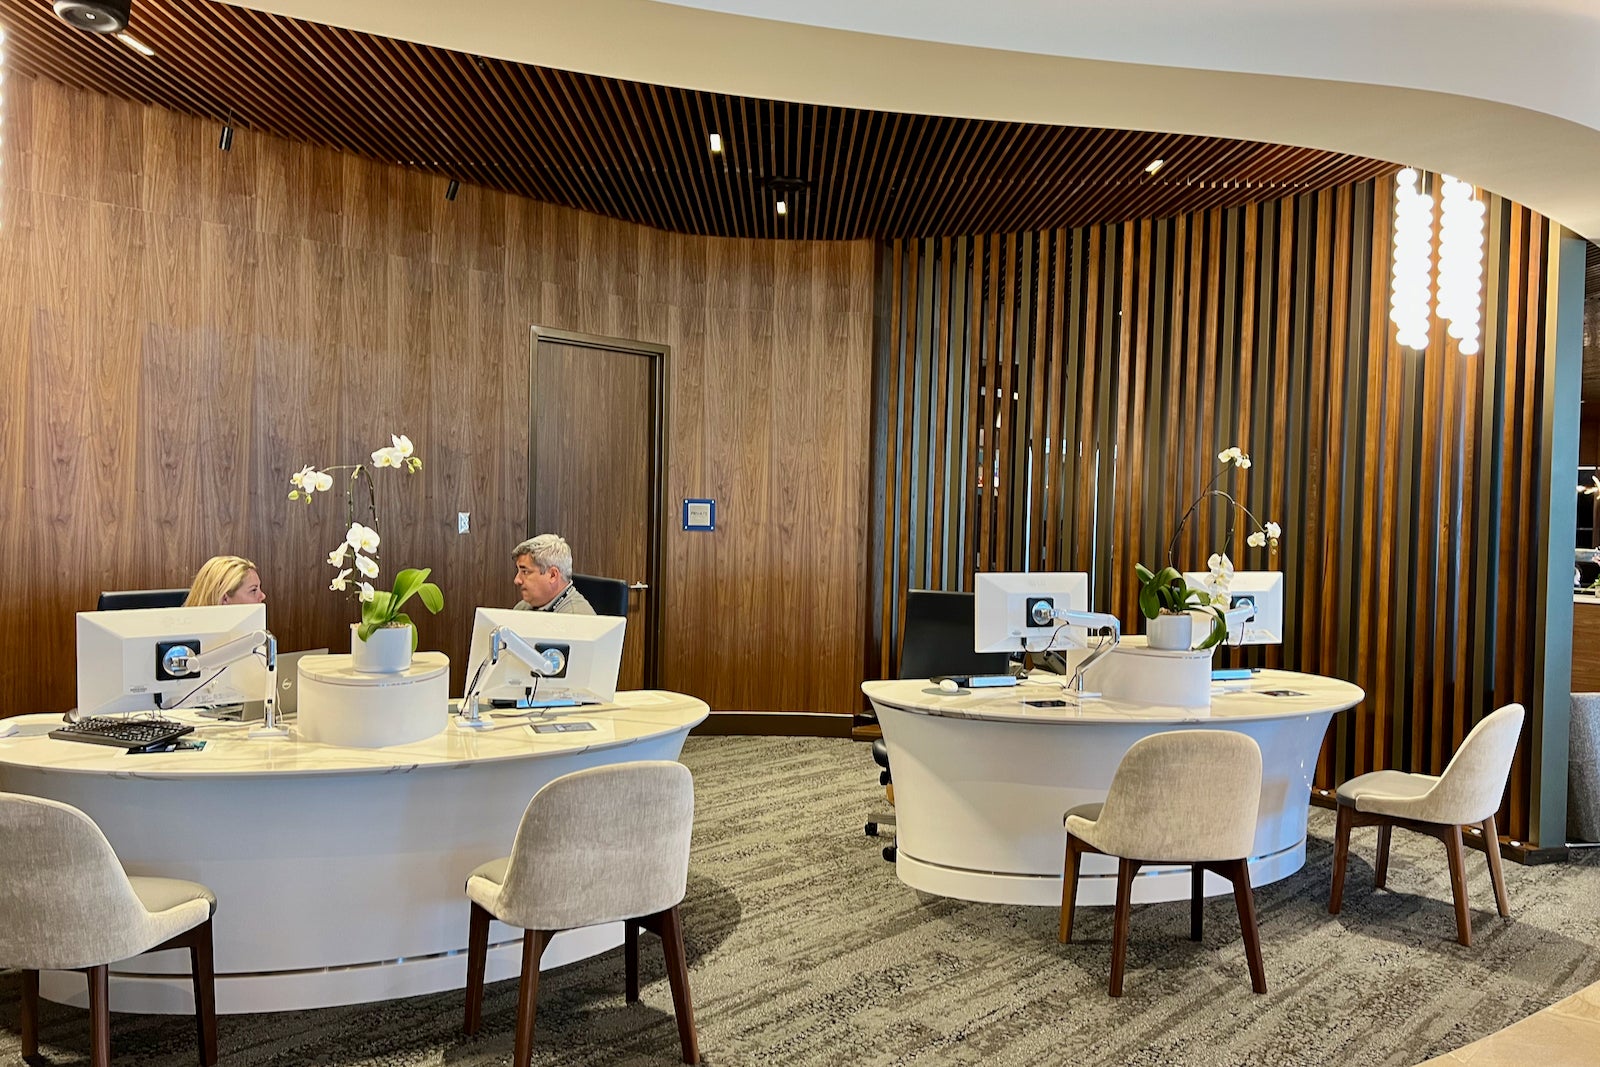 Delta Sky Club Los Angeles LAX Zach Griff 56 - Travel News, Insights & Resources.